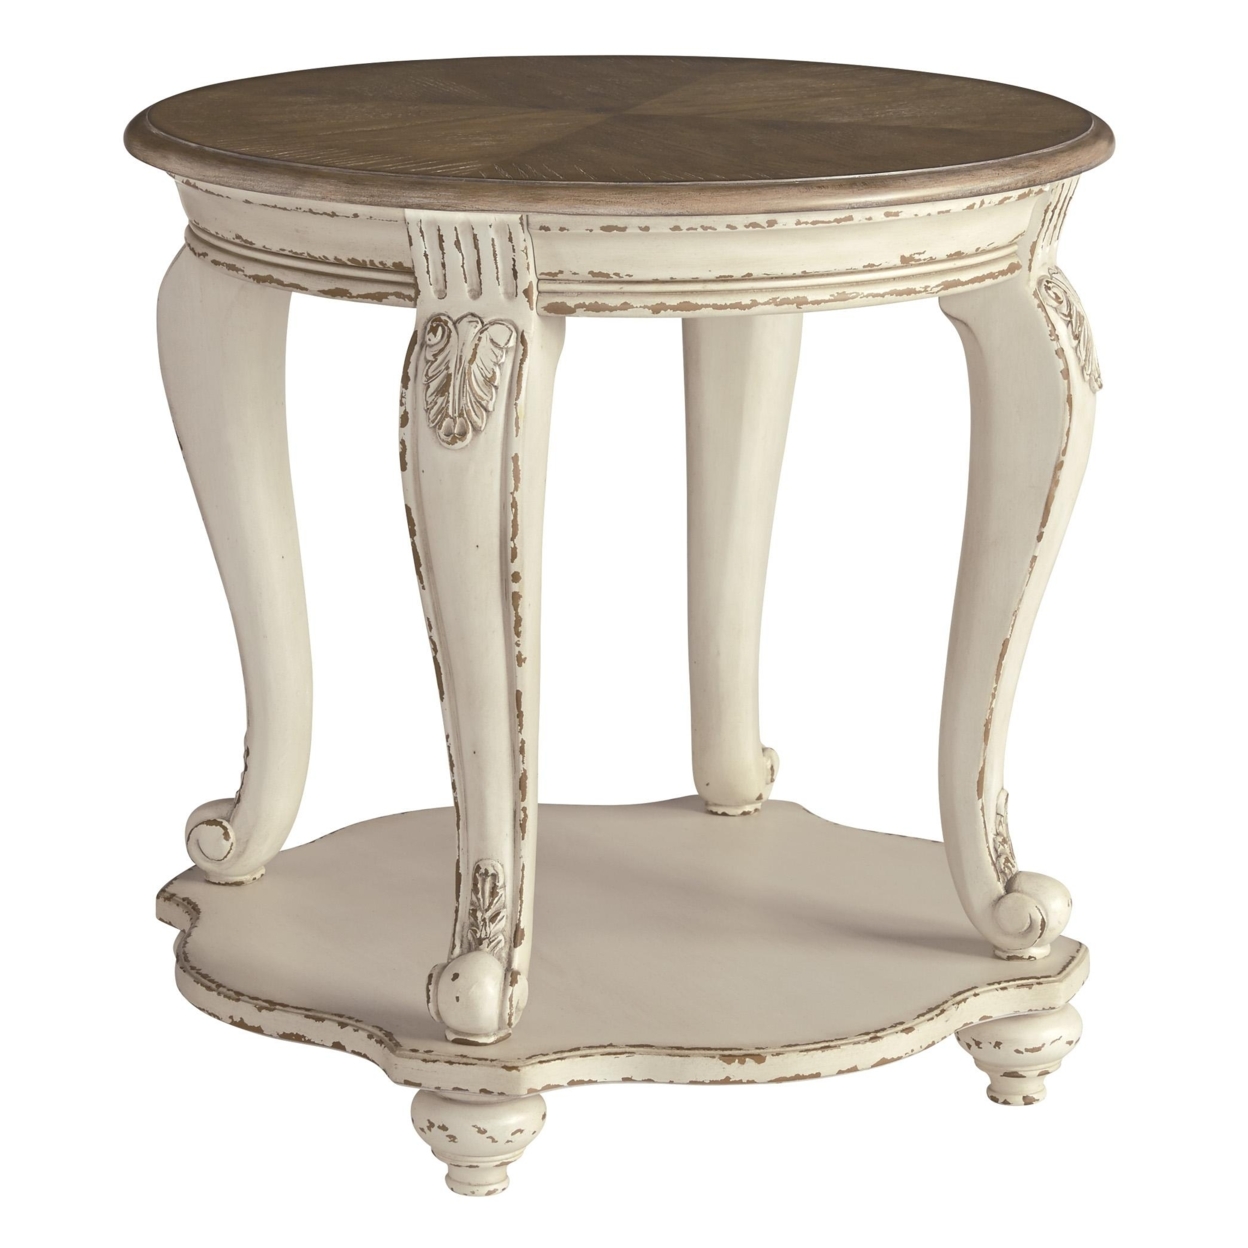 Round Wooden End Table With Open Bottom Shelf, Brown And Antique White- Saltoro Sherpi